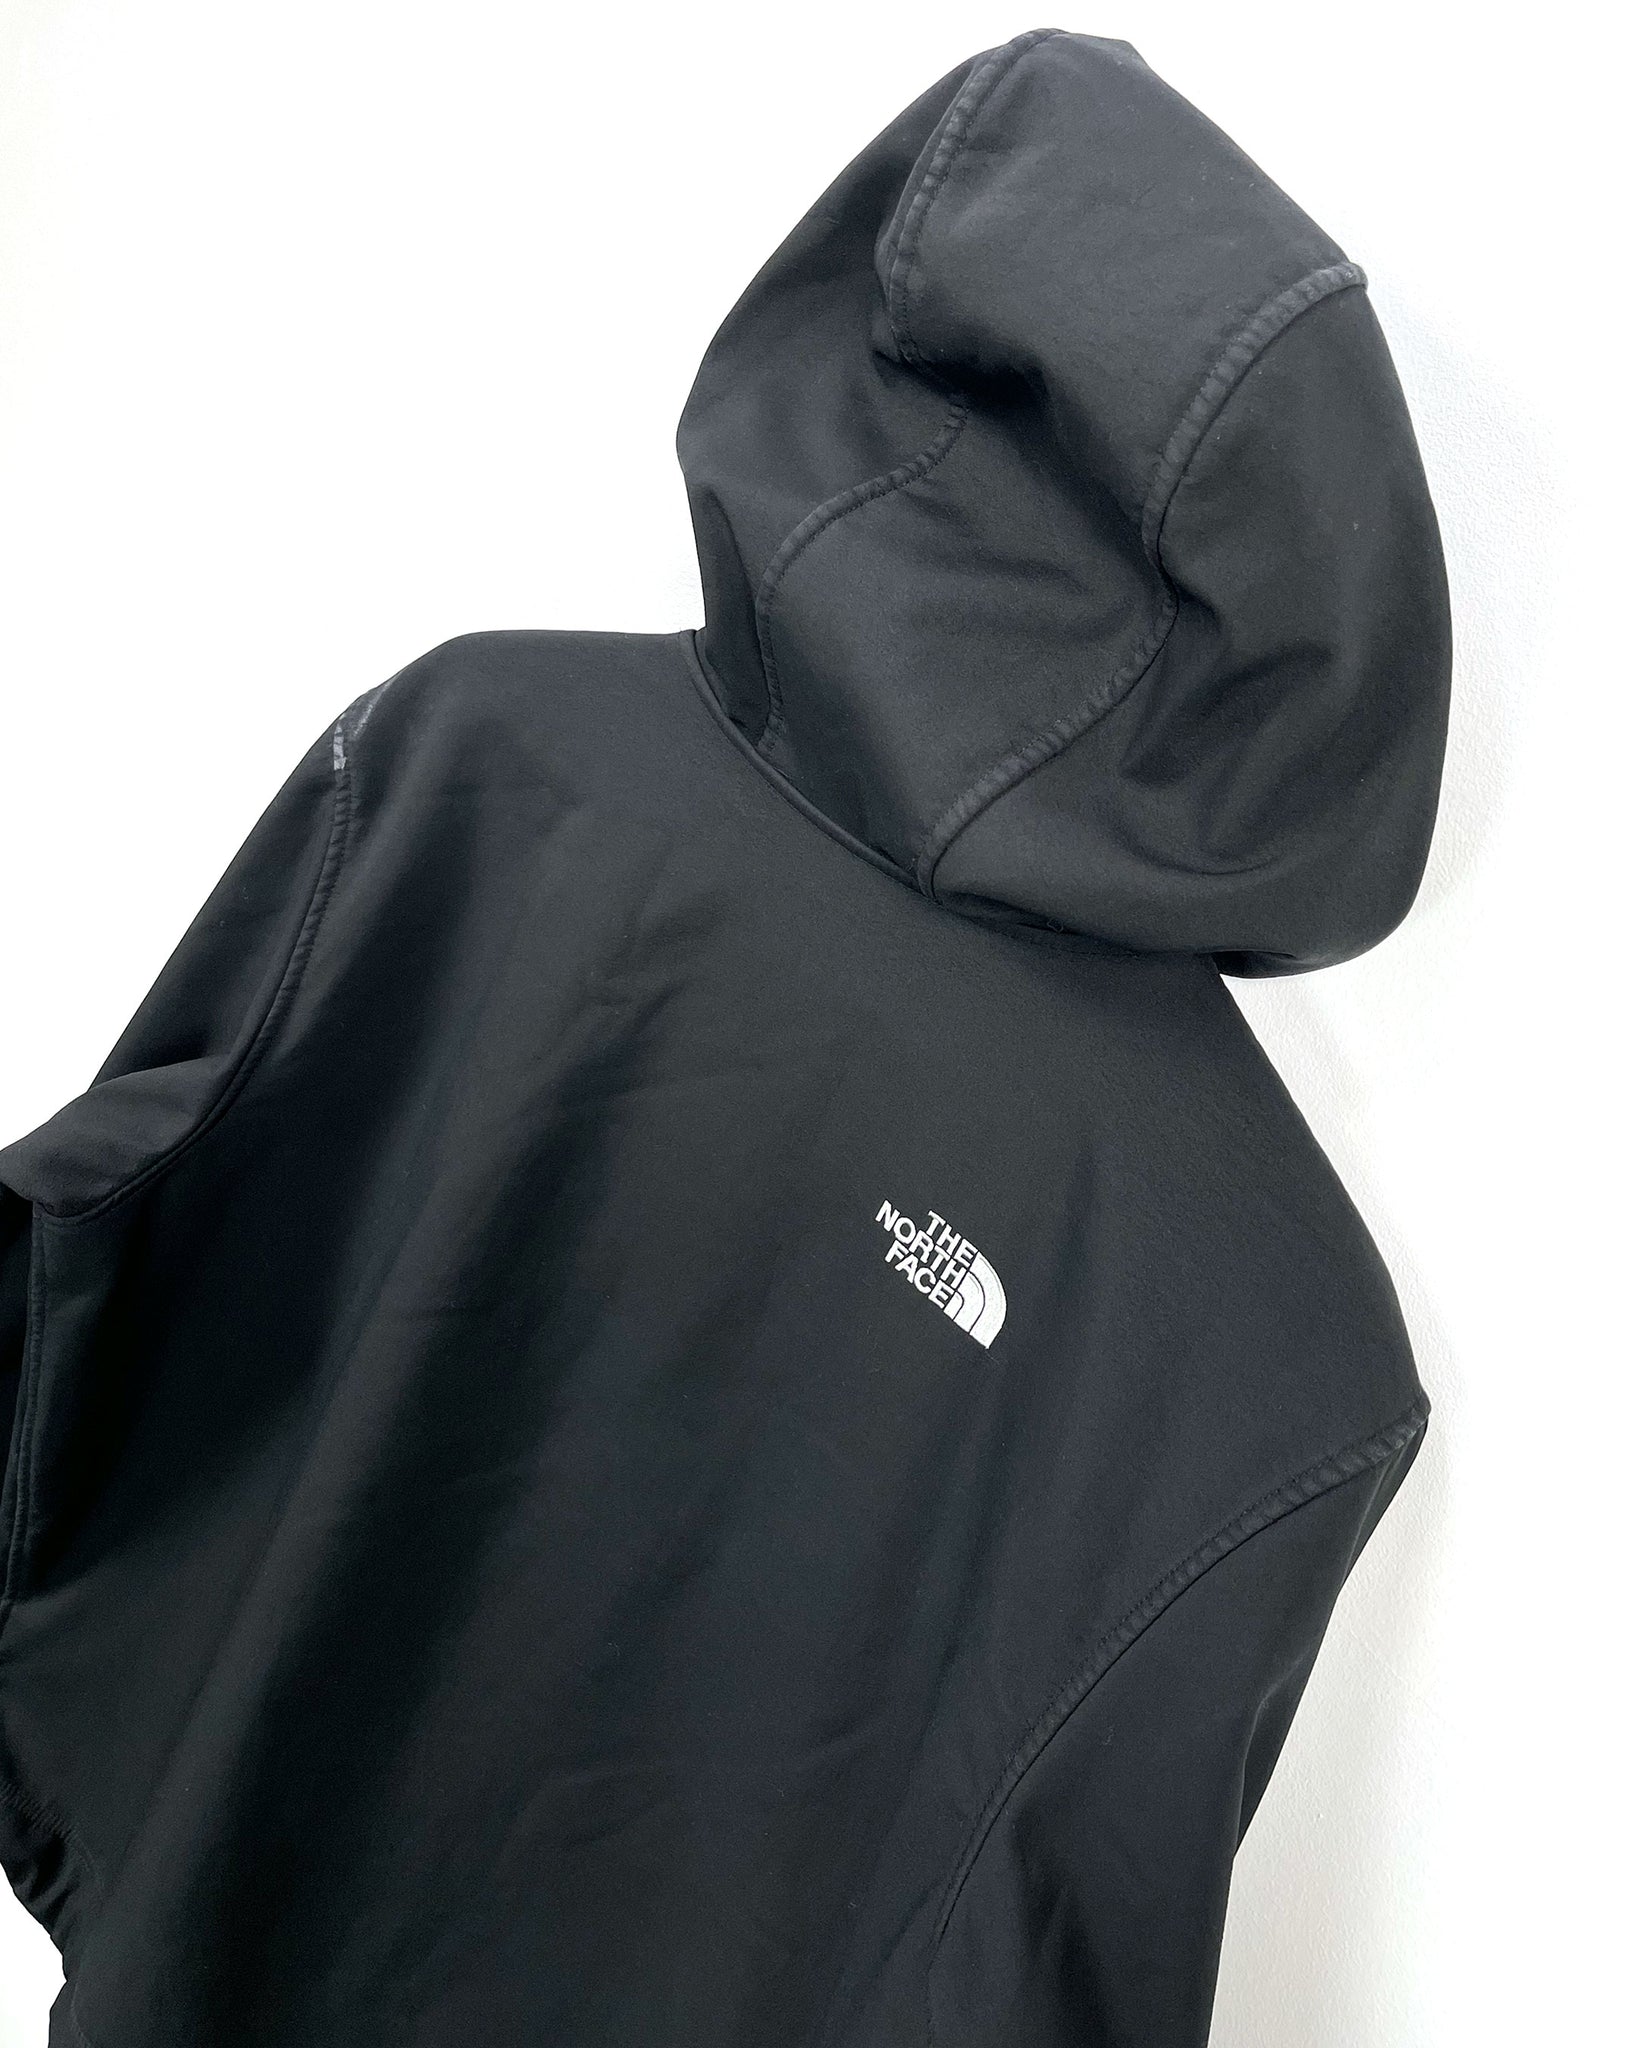 THE NORTH FACE JACKET